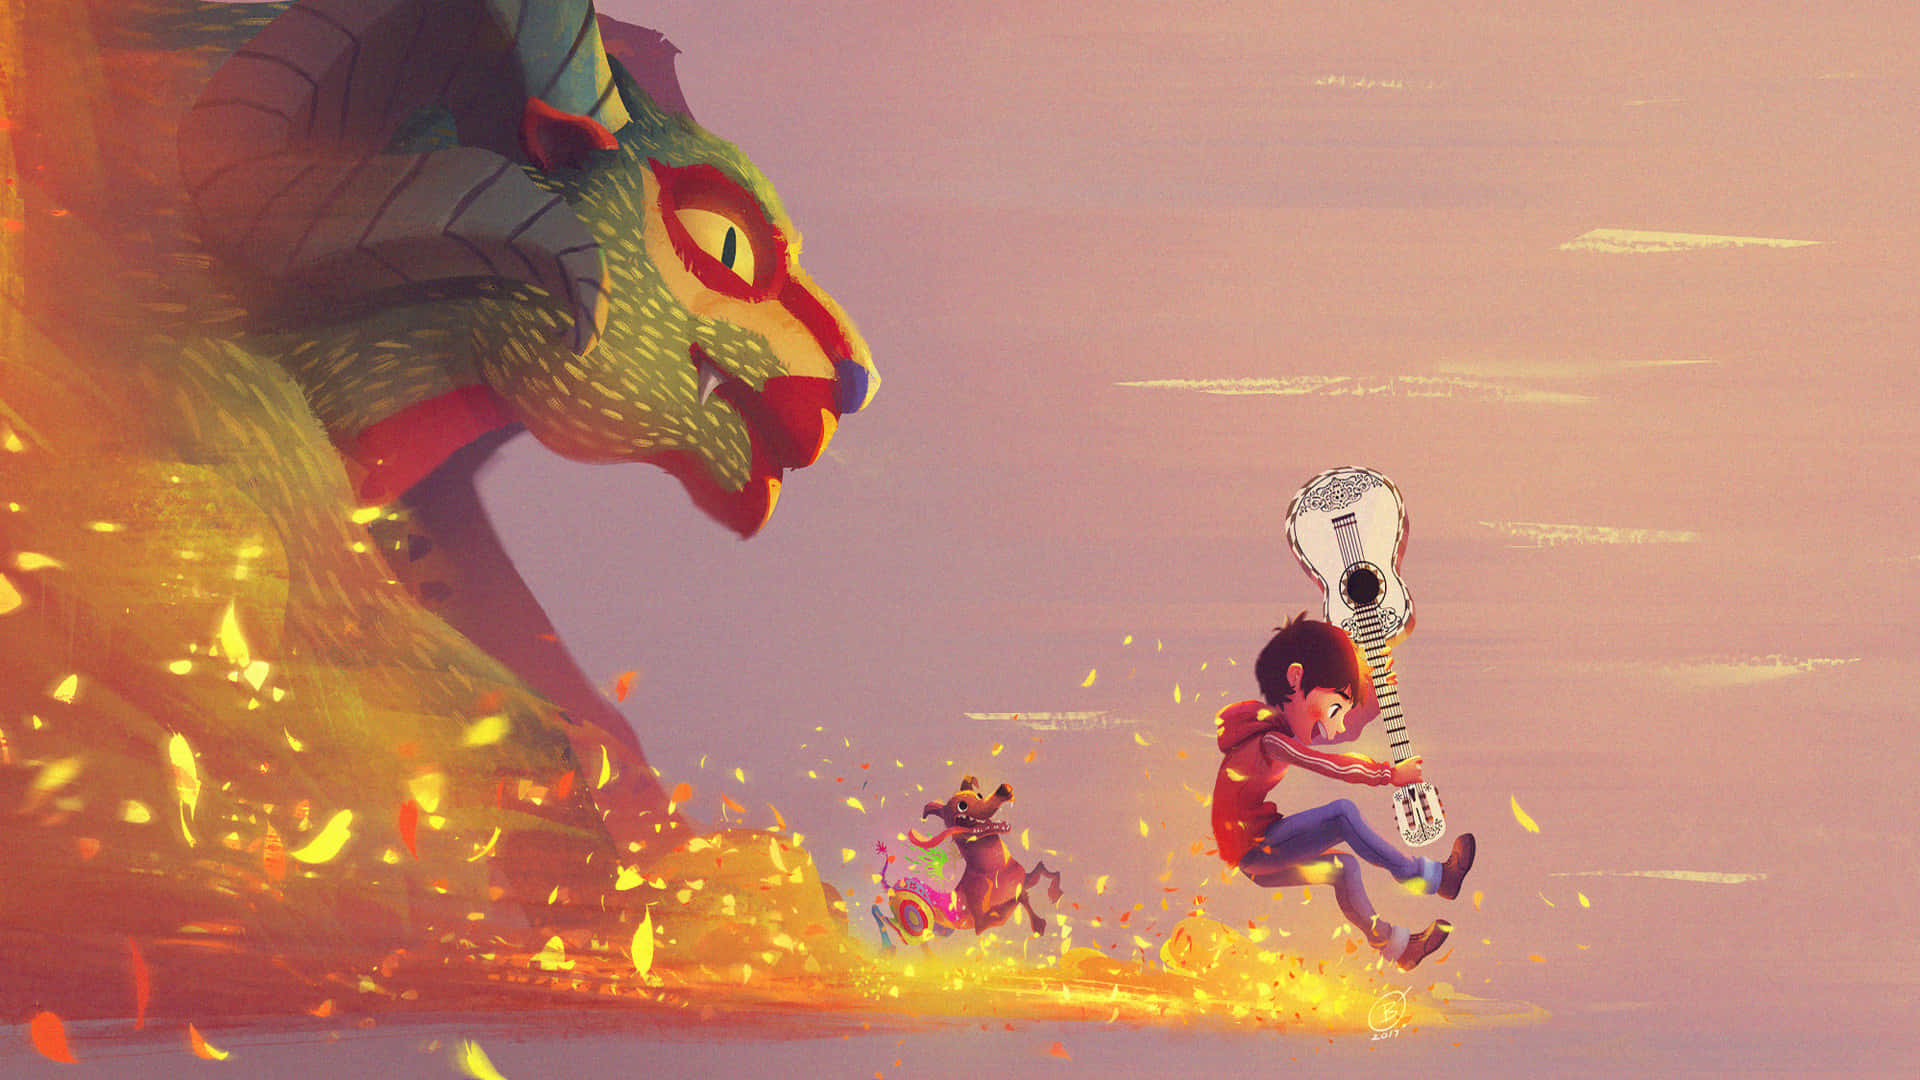 Get inspired by the intricate and magical world of Coco